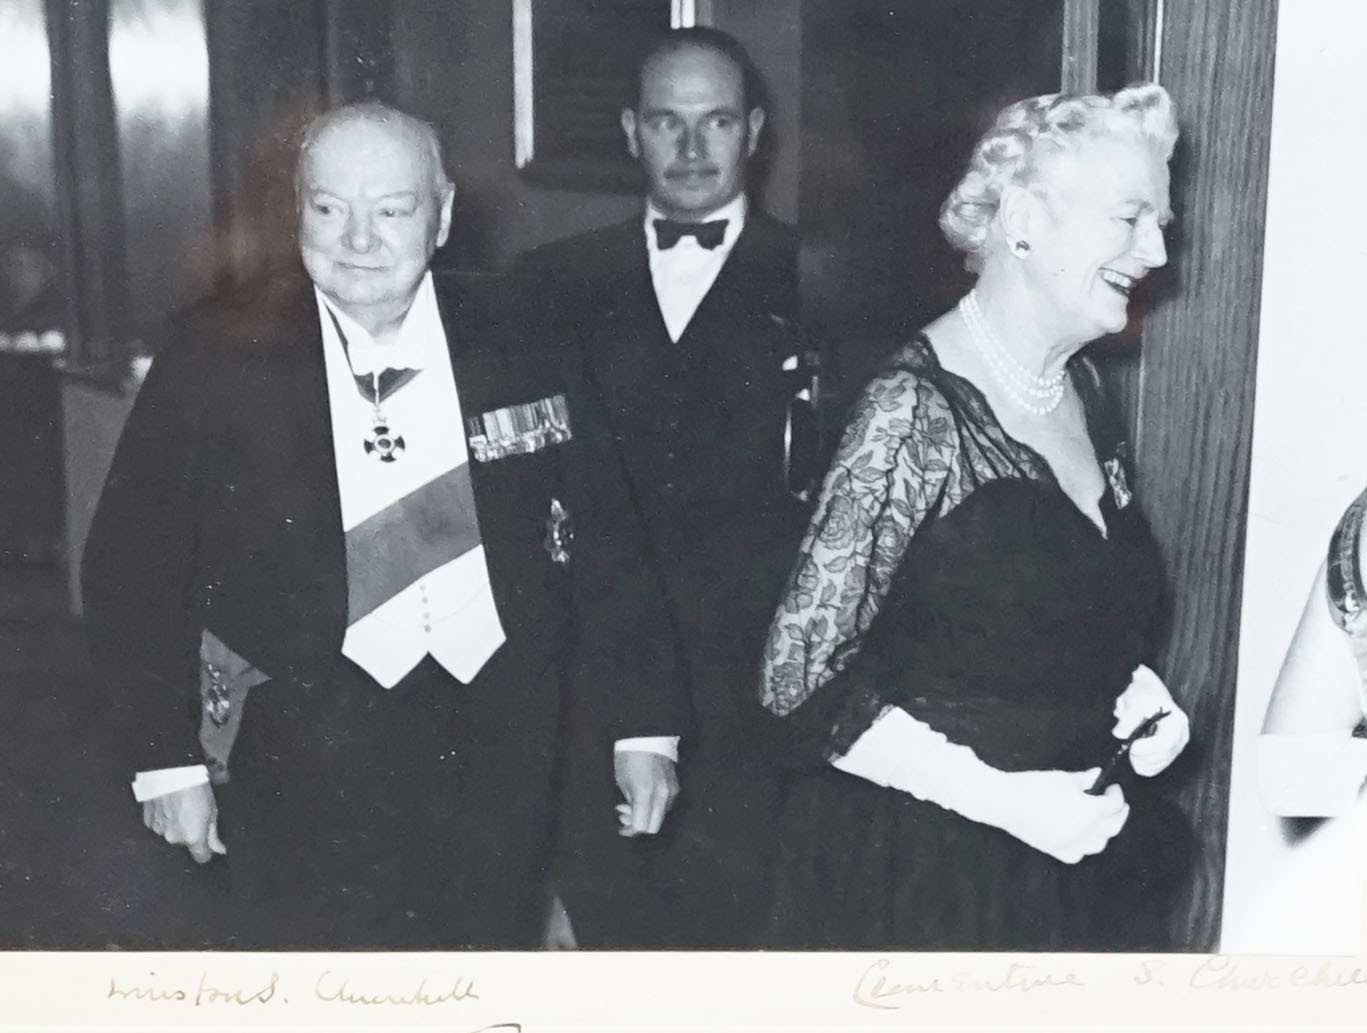 A signed photograph of Sir Winston Churchill and his wife Clementine taken 20th April 1956 at The St James Hawkey Hall, Woodford Green, overall 17.5 x 22.5cm